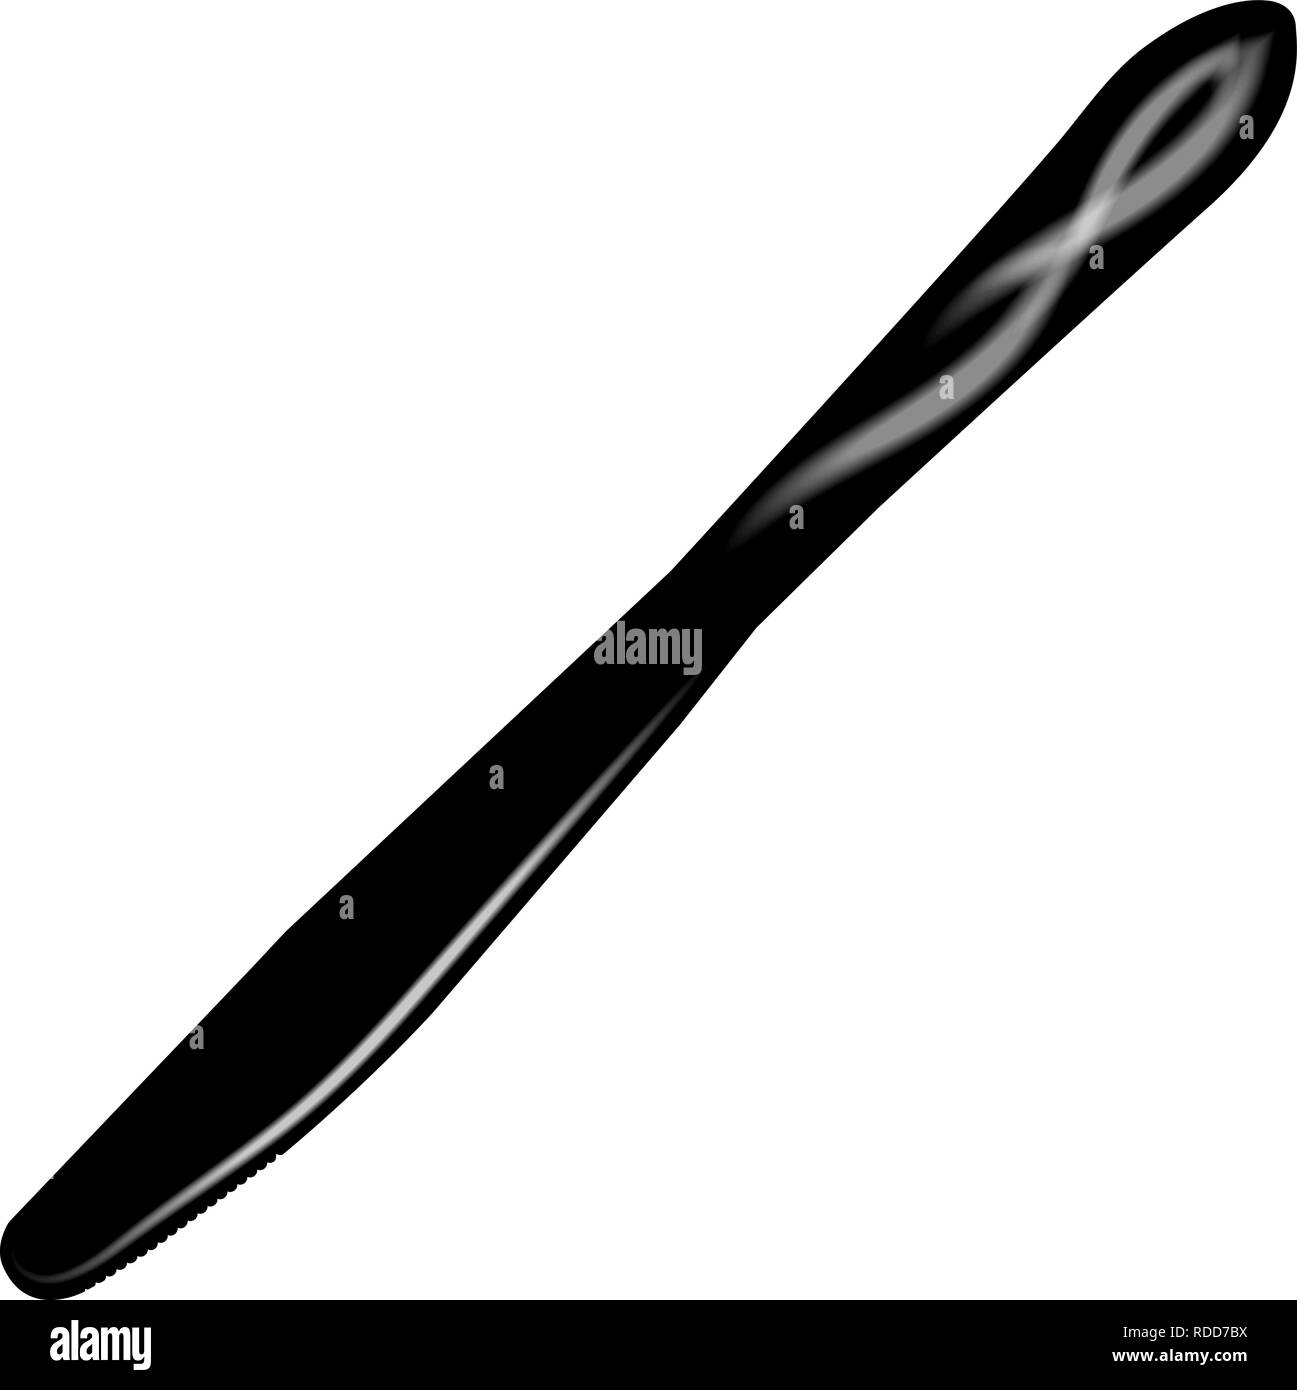 table knife silhouette vector graphic isolated on white background, Stock Vector